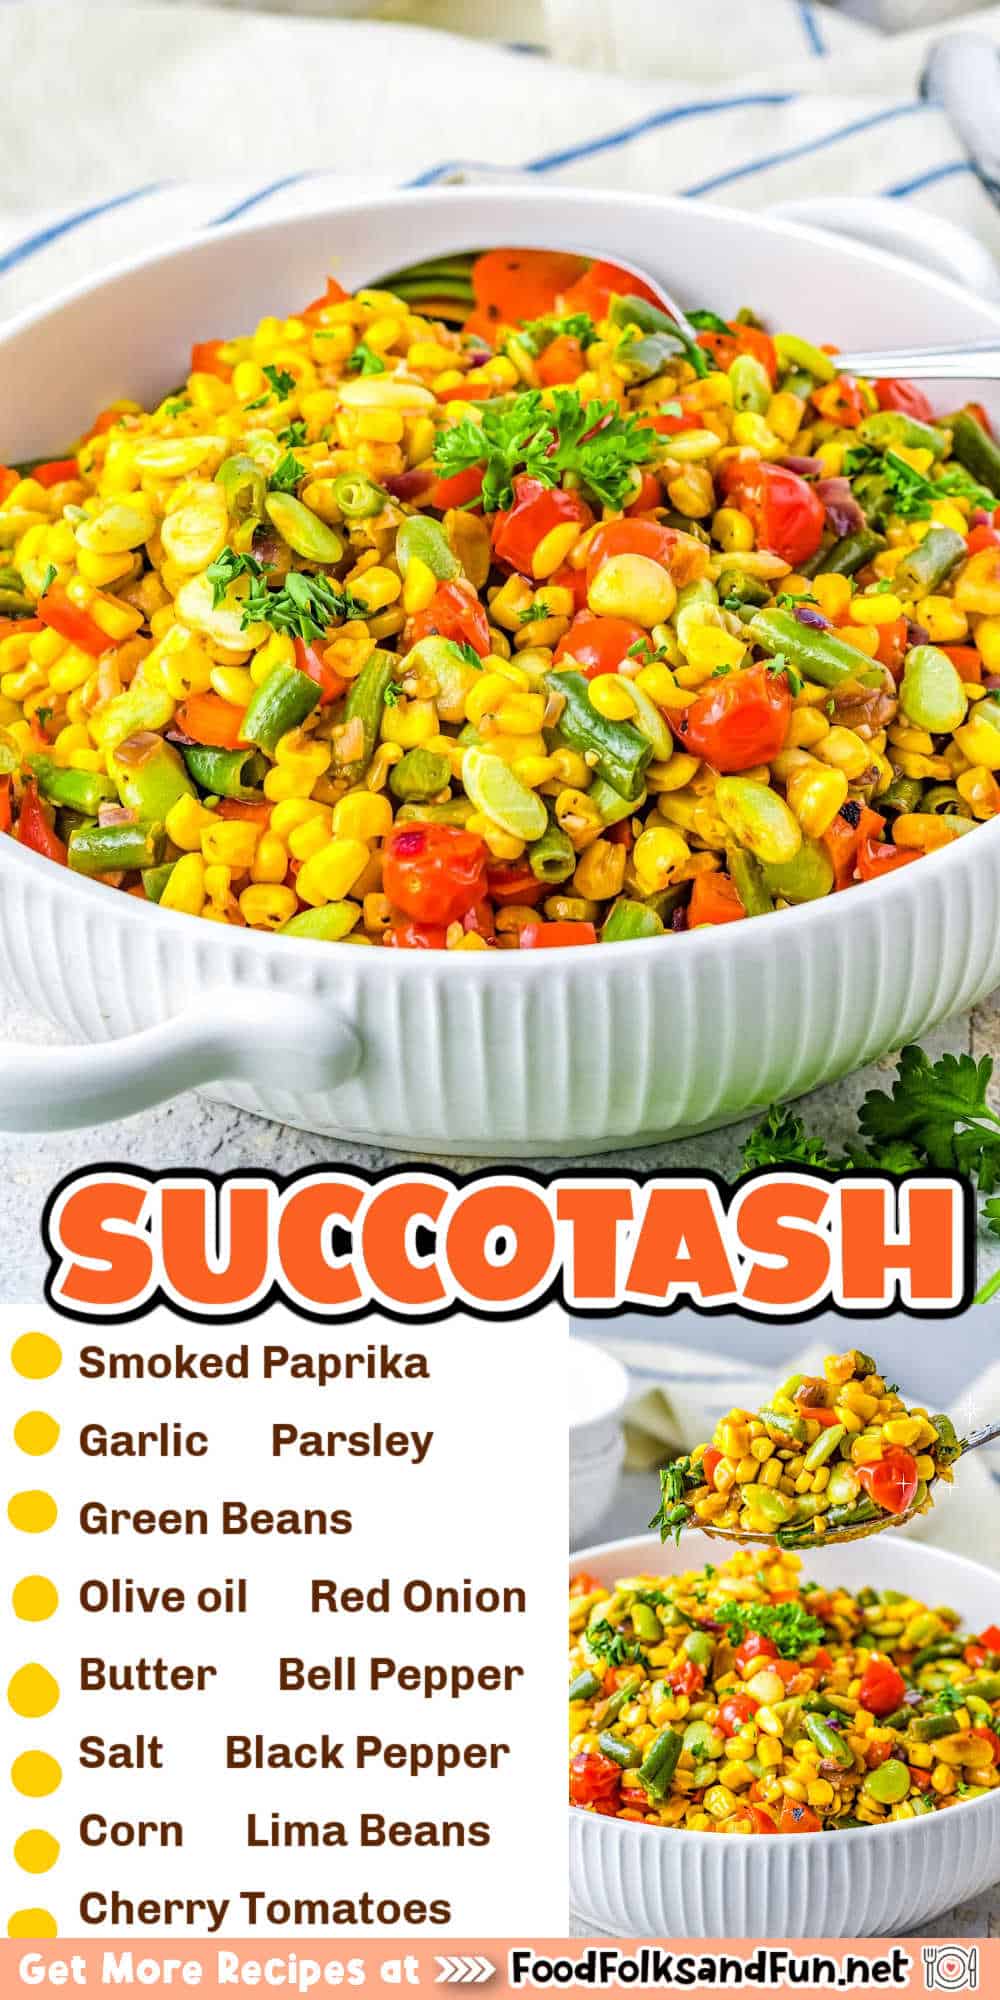 Corn Succotash is an American classic side dish that is made with corn and lima beans along with any other vegetables. It’s a hearty side dish with quite the historic resume. via @foodfolksandfun